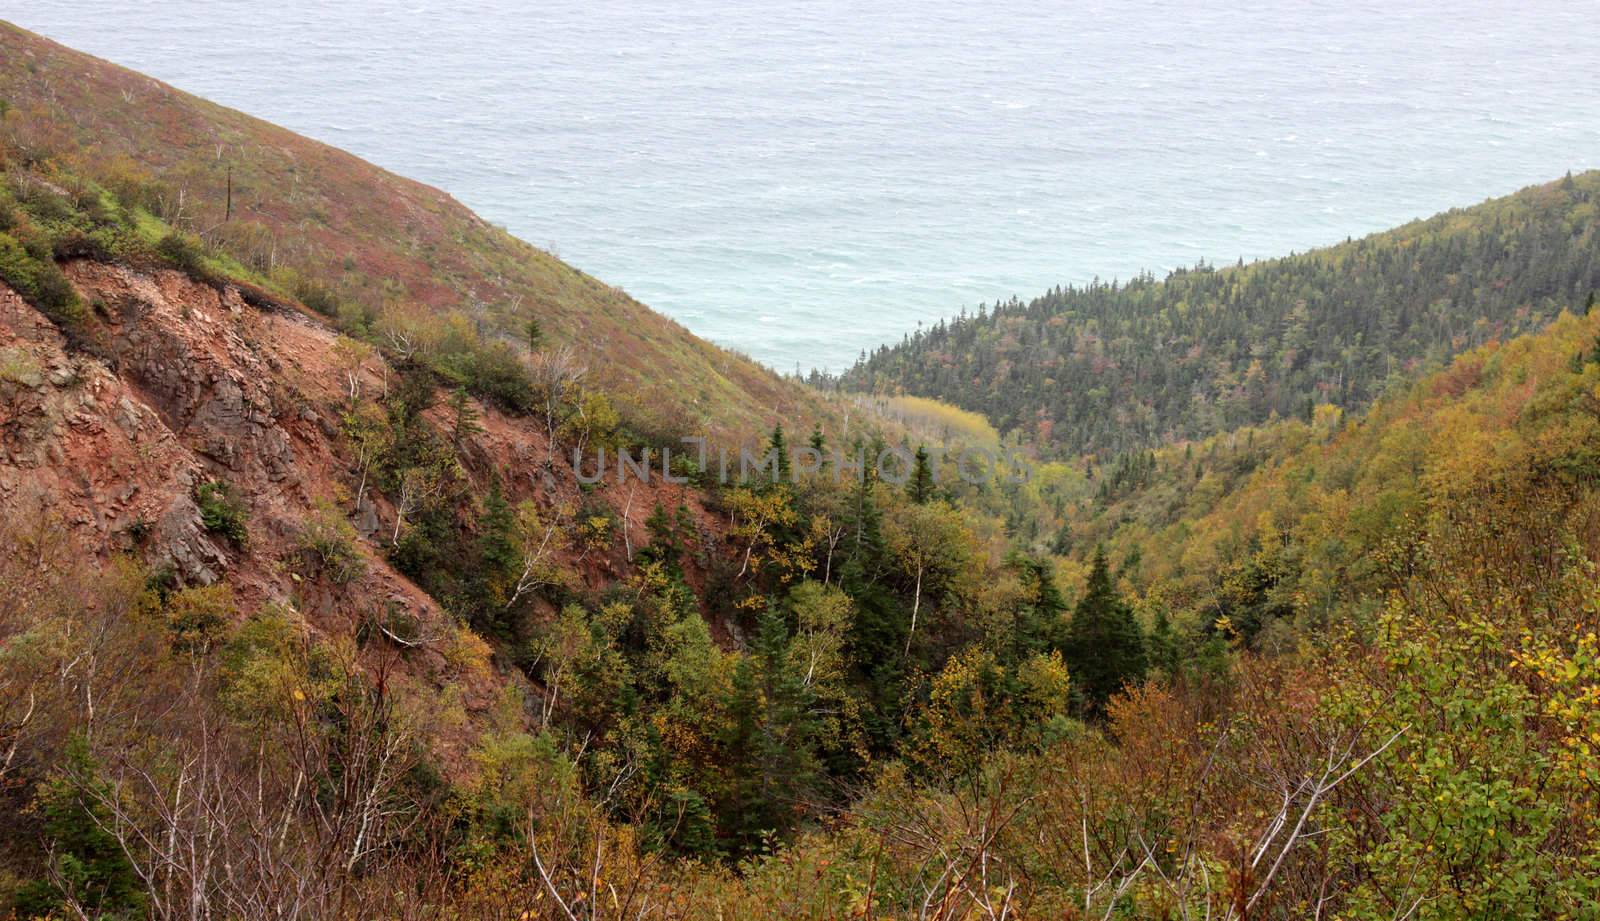 The rolling cliff like hills of Cape Breton Highlands national park in Nova Scotia, Canada.
